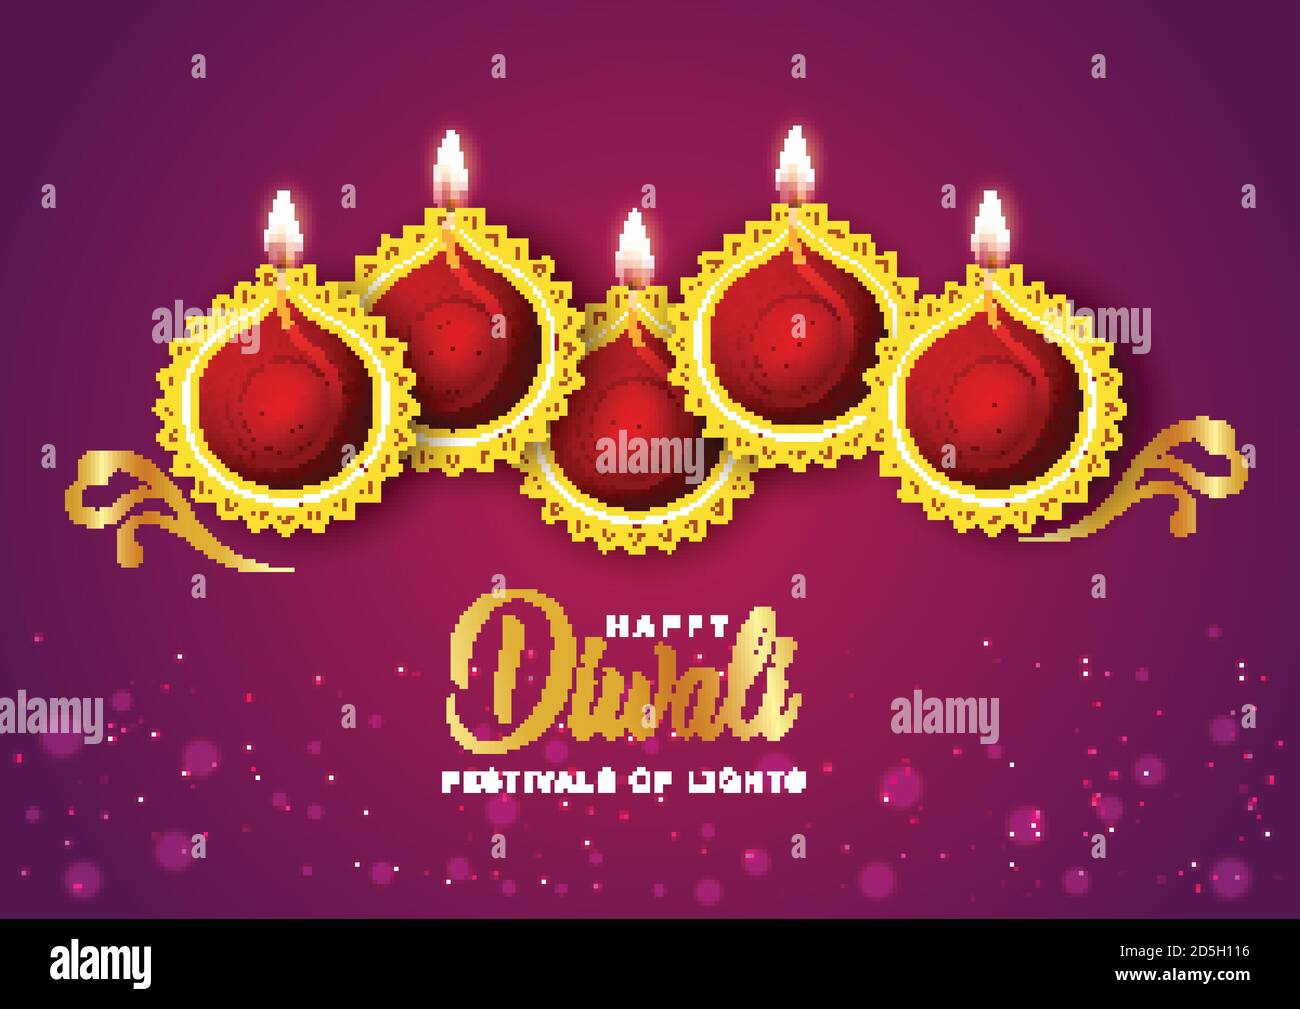 Happy Diwali celebration background. Top view of banner design decorated with illuminated oil lamps on patterned dark background. vector illustration Stock Vector